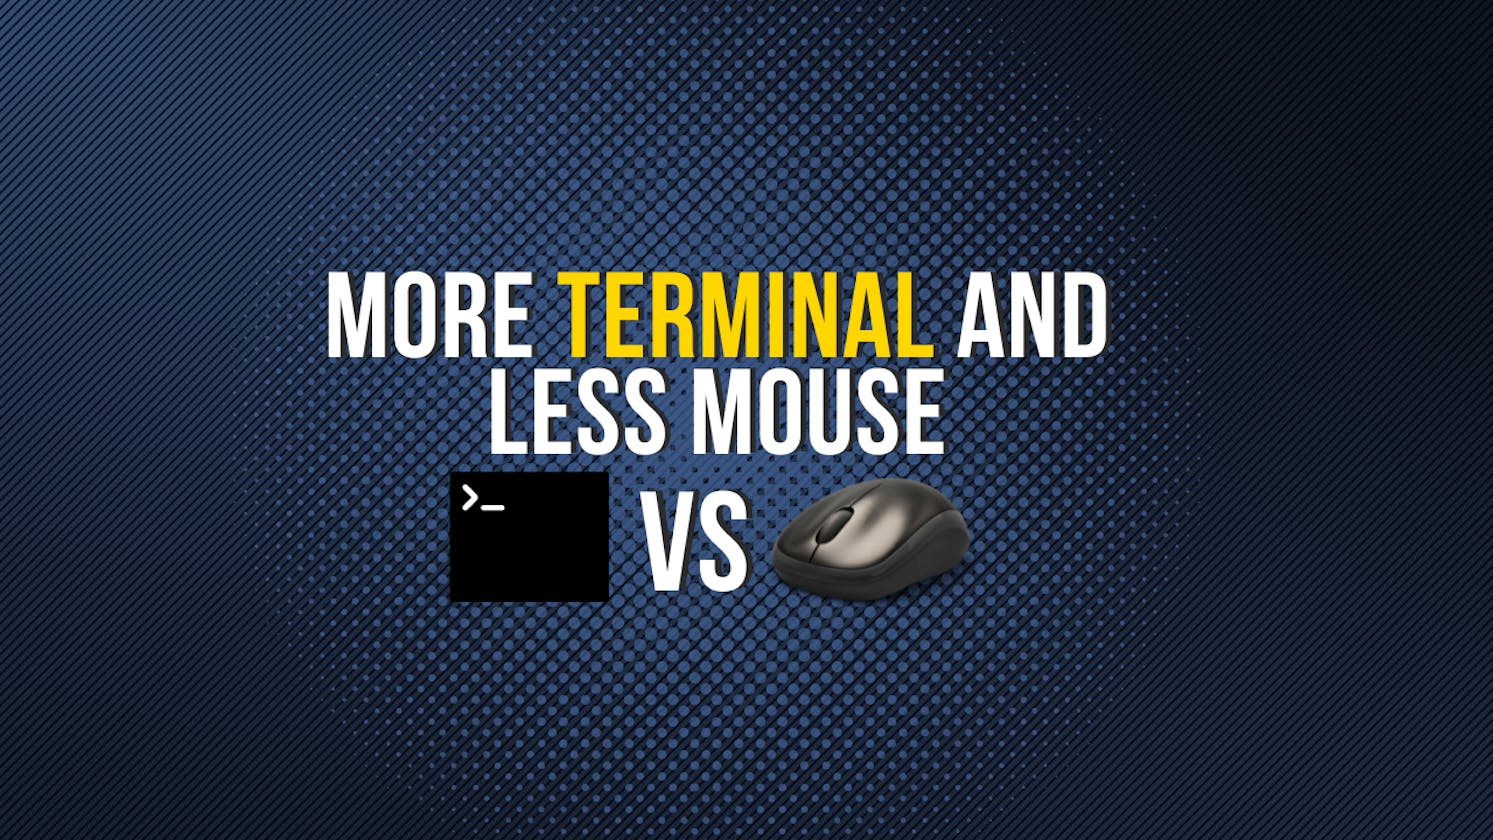 Improve your productivity by using more terminal and less mouse.